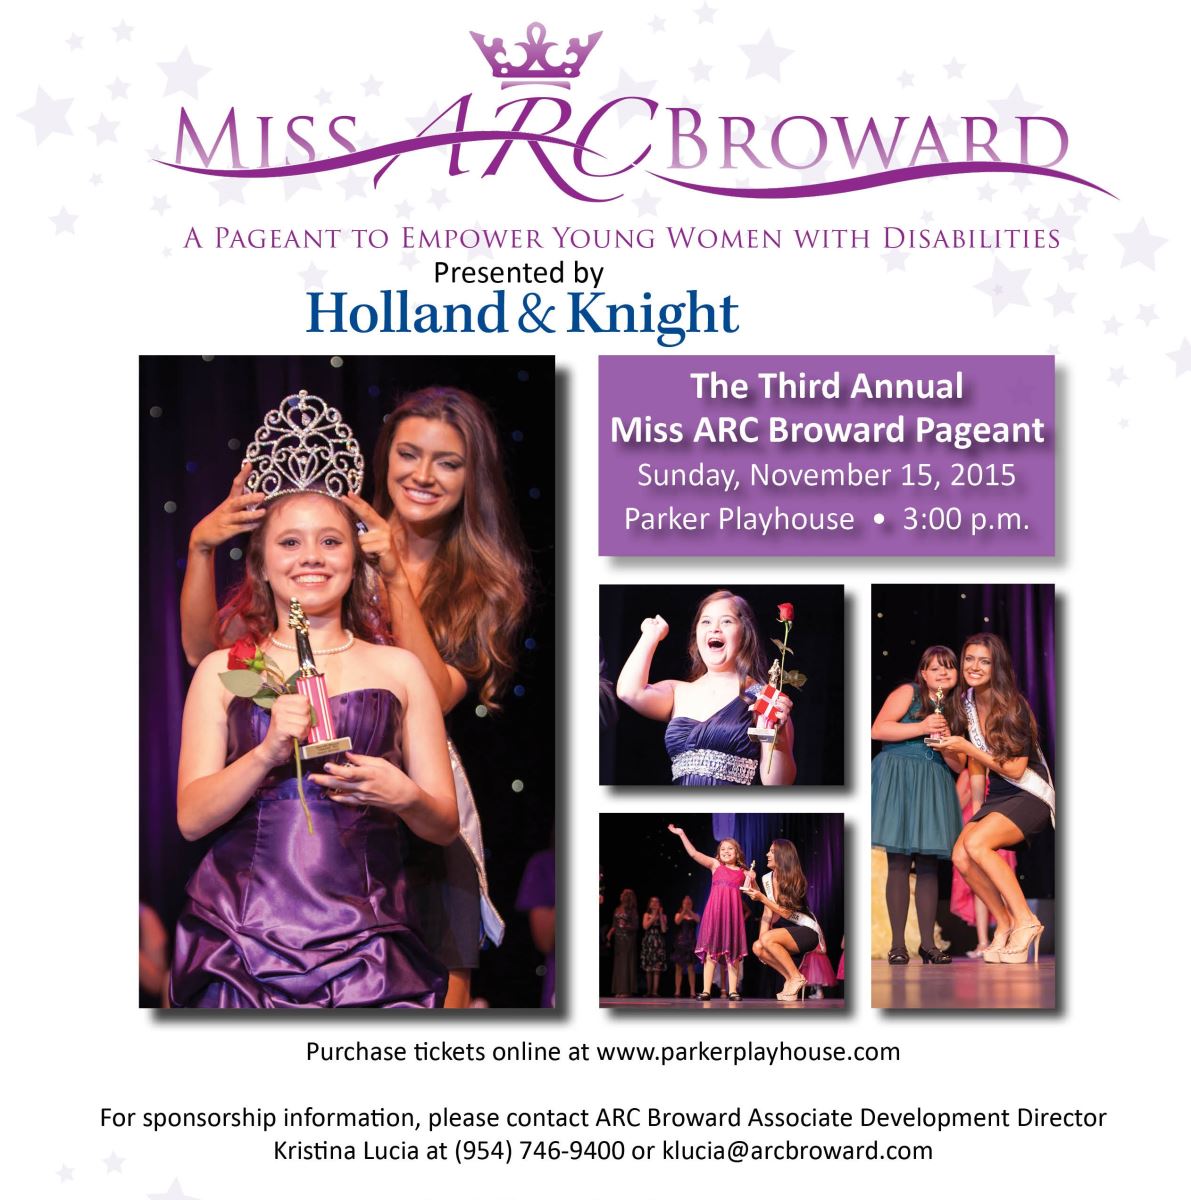 Miss ARC Broward Pageant, a pageant to empower women with disabilities, will take place November 15 at Parker Playhouse in Fort Lauderdale.